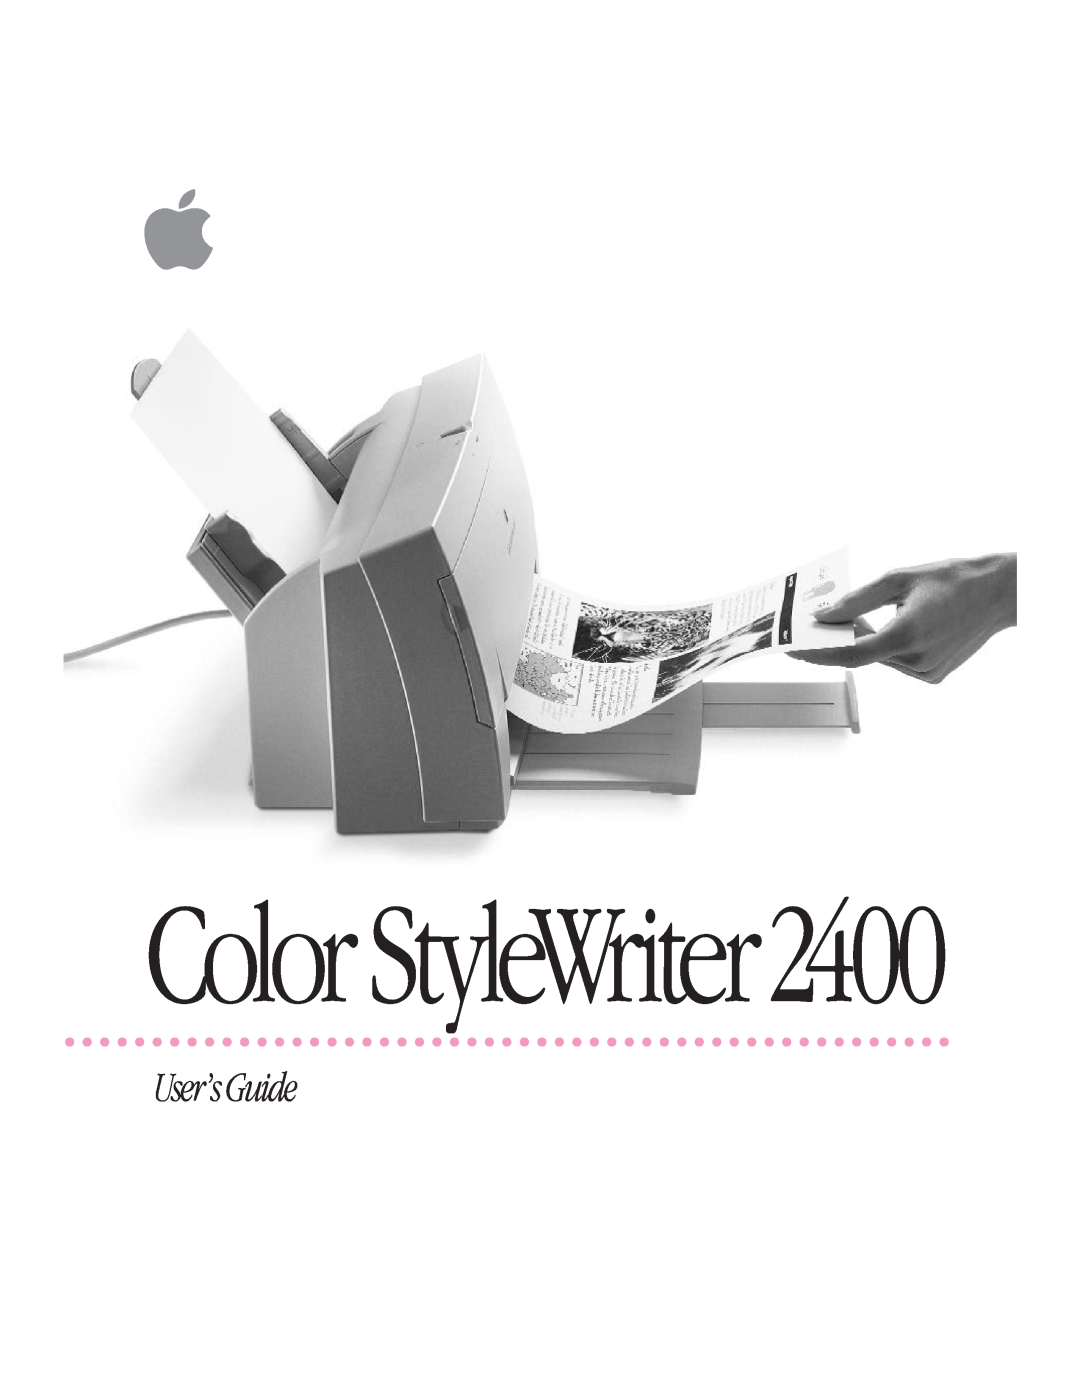 Apple manual Color StyleWriter2400, User’s Guide 